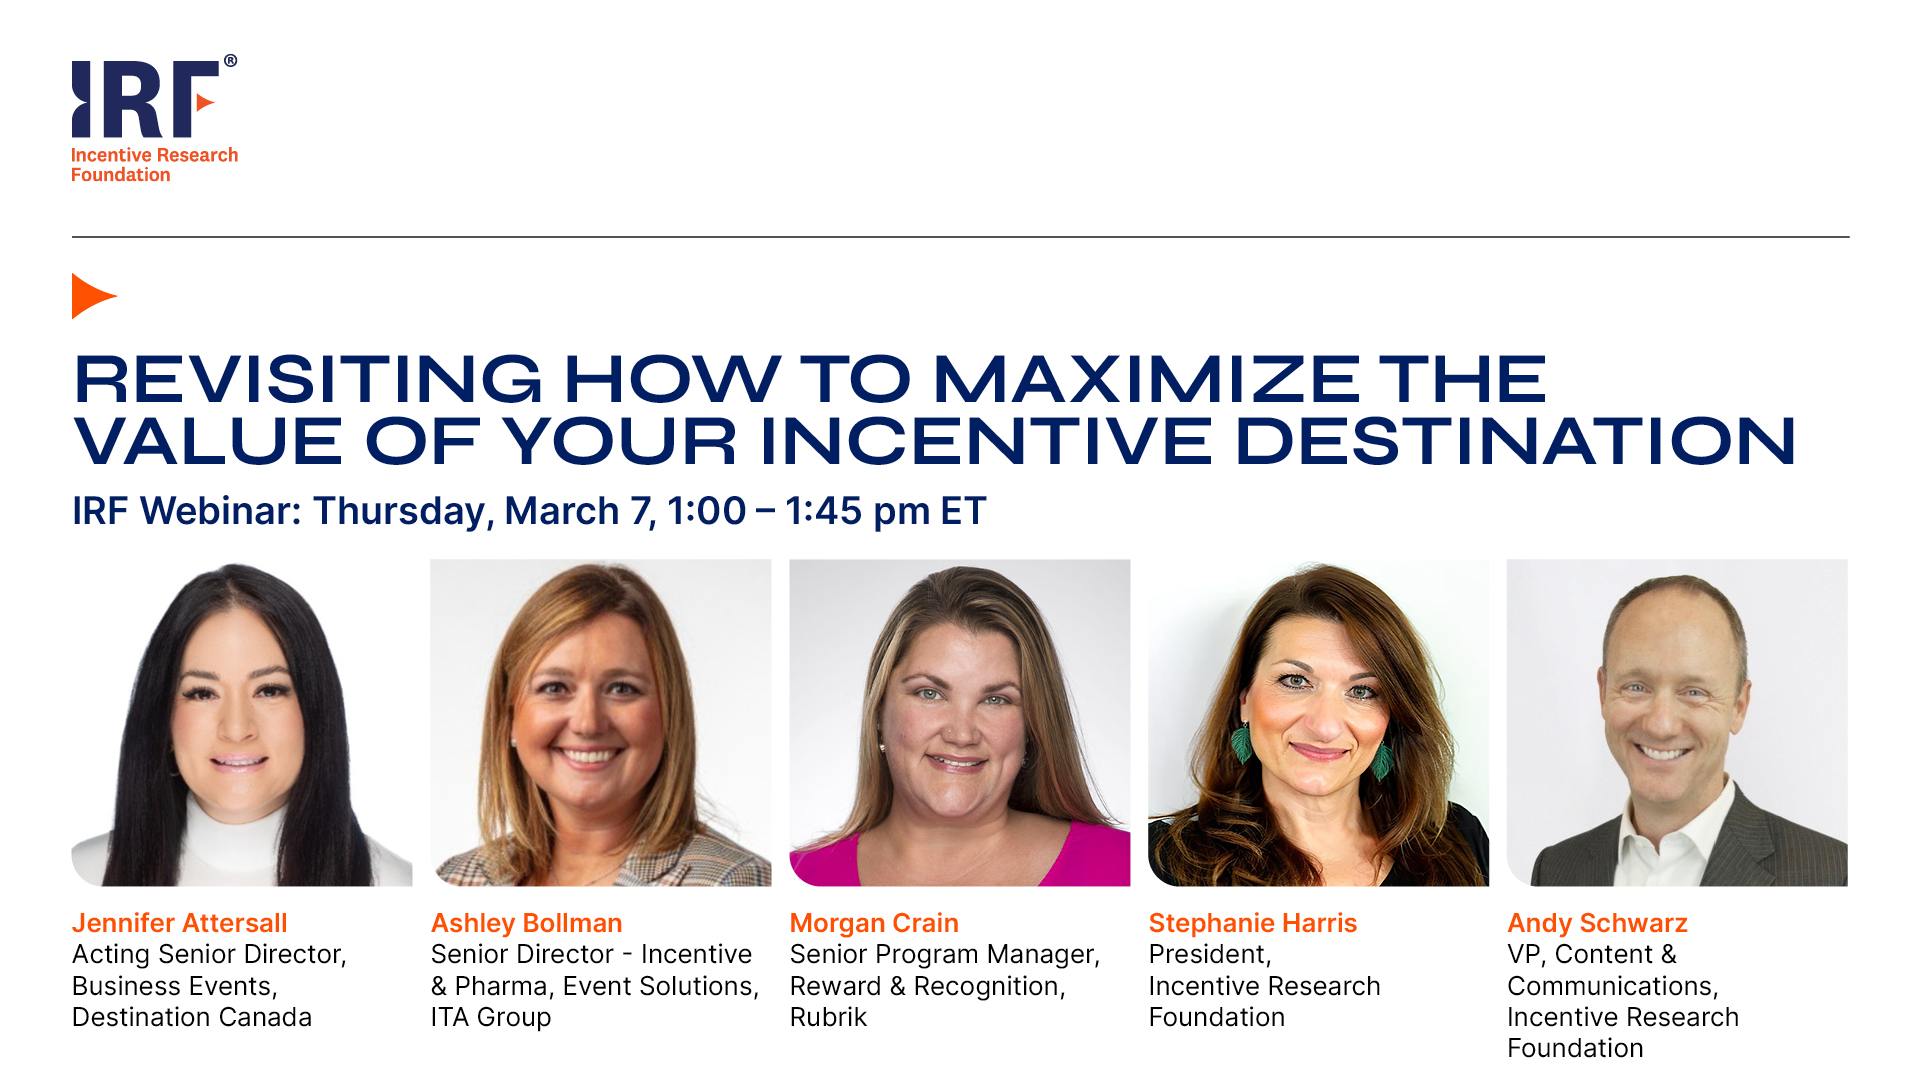 IRF Webinar: Revisiting How to Maximize the Value of Your Incentive Destination 